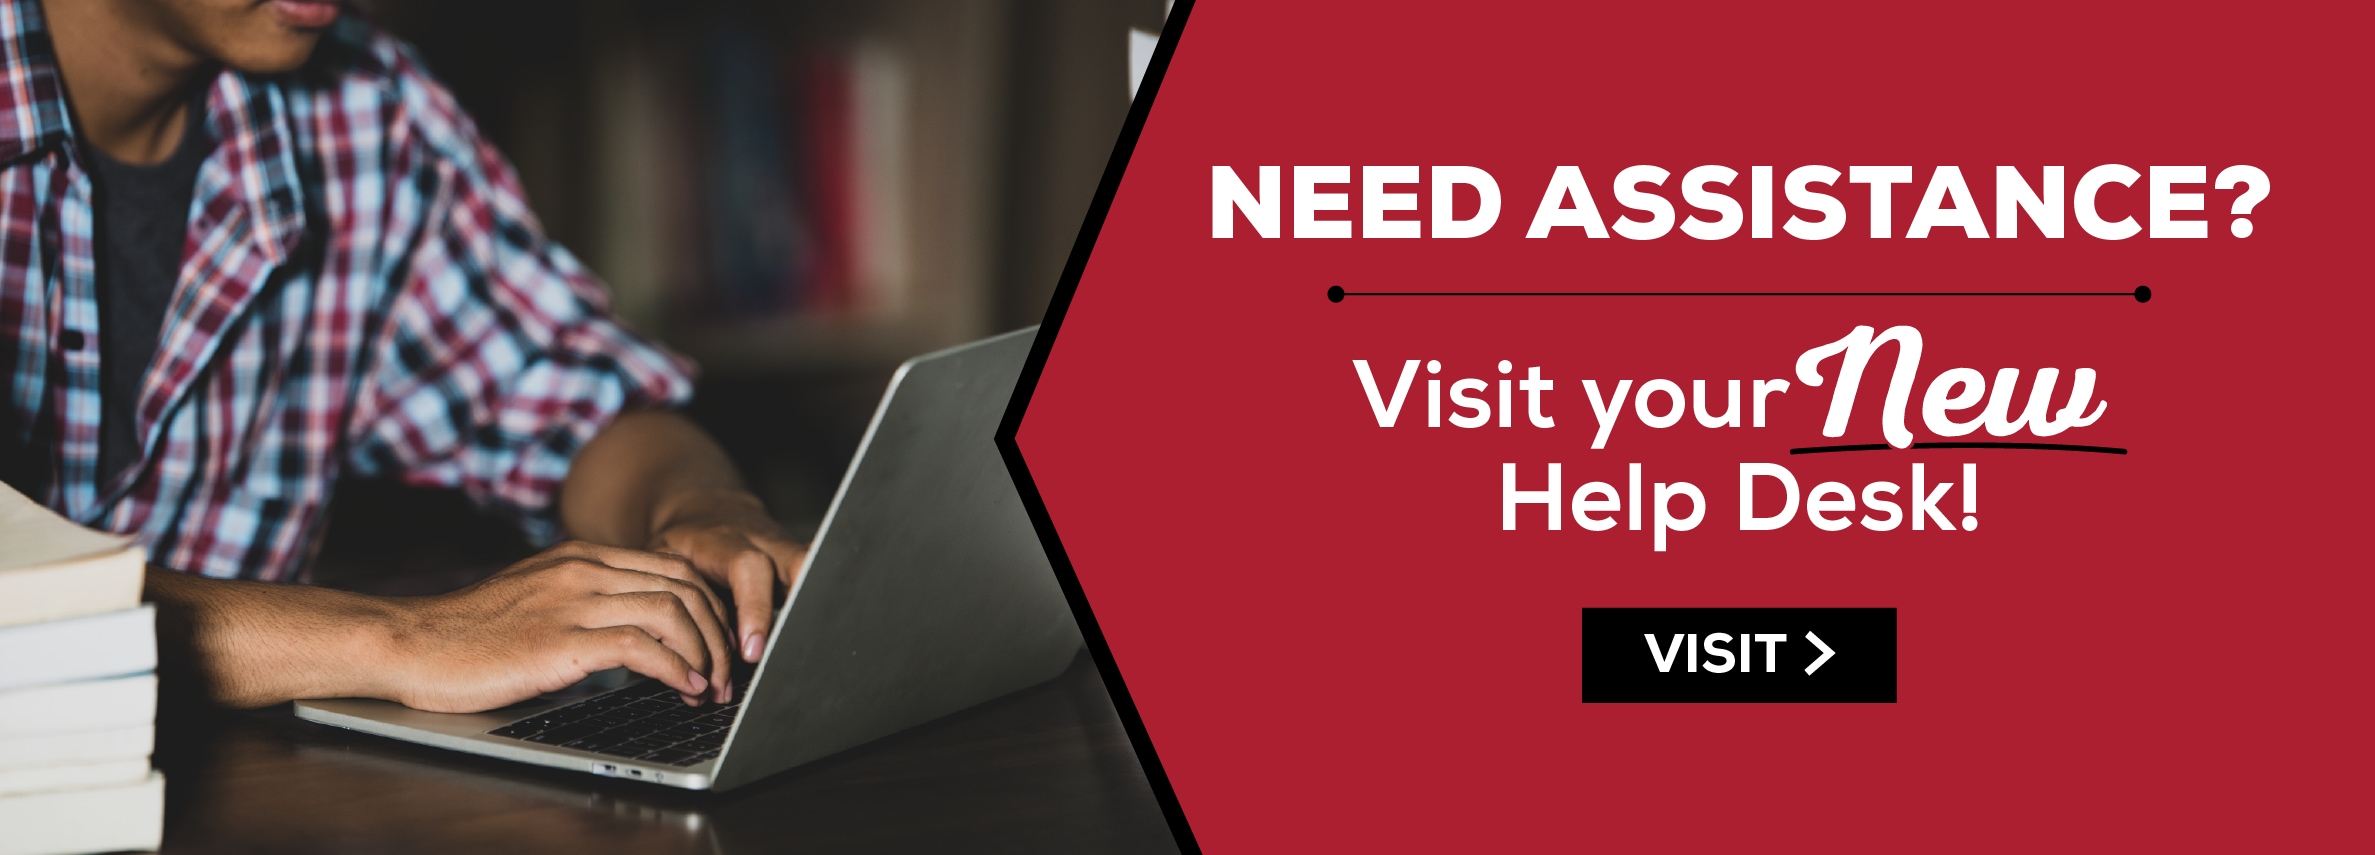 NEED ASSISTANCE? Visit your New Help Desk! VISIT > (new tab)